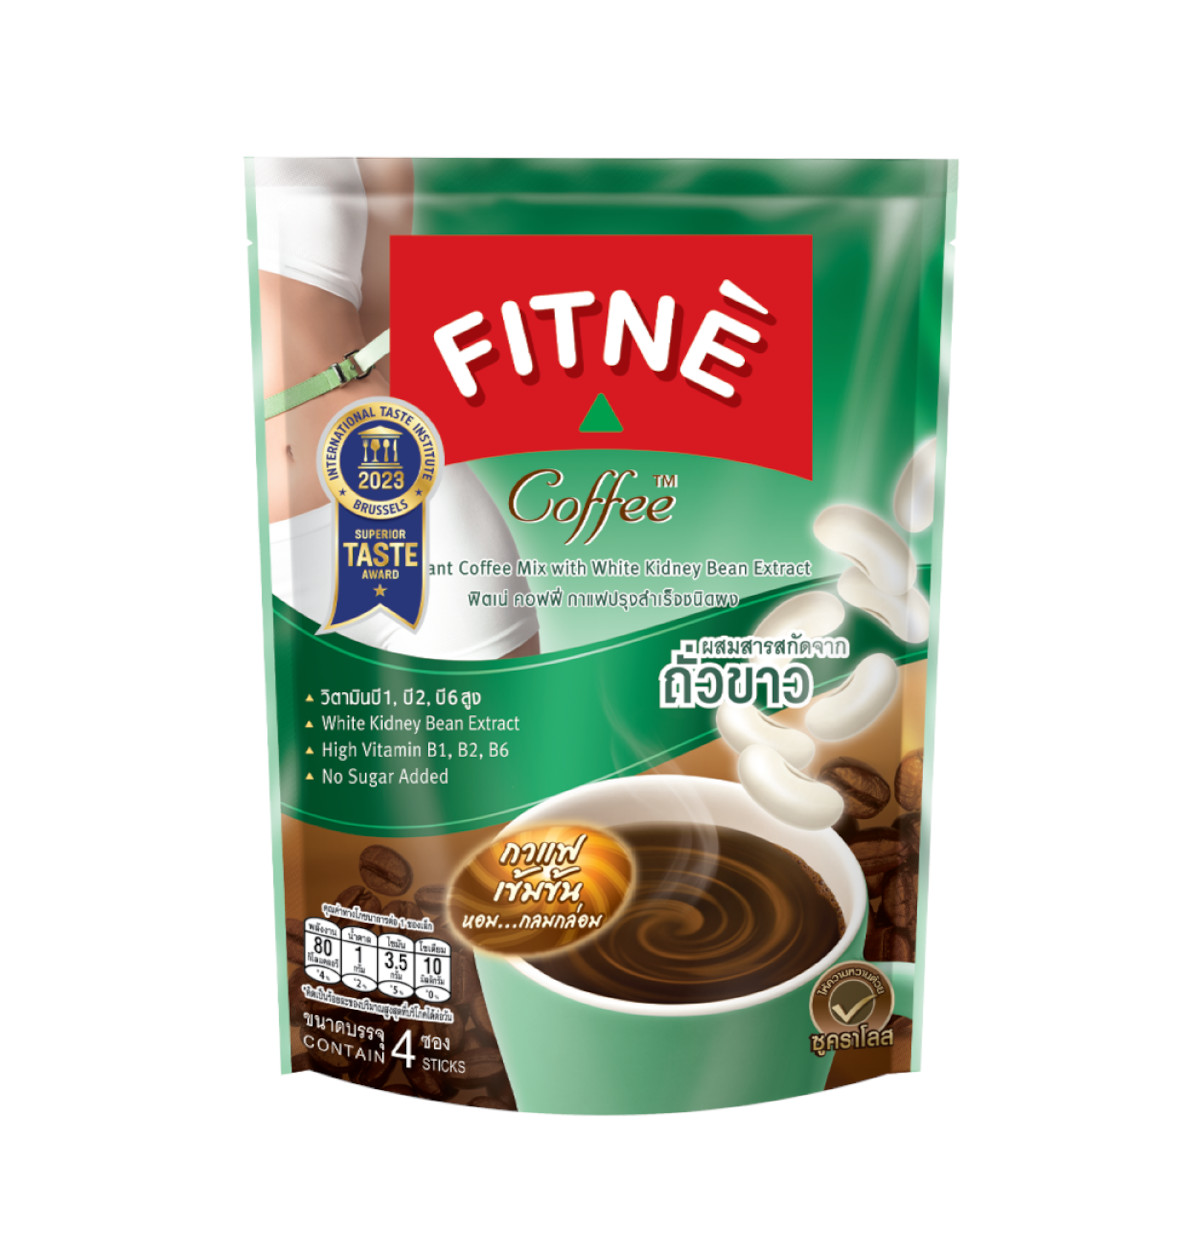 FITNE' Coffee Instant Coffee Mix with White Kidney Bean Extract 15g. x 4 Sticks